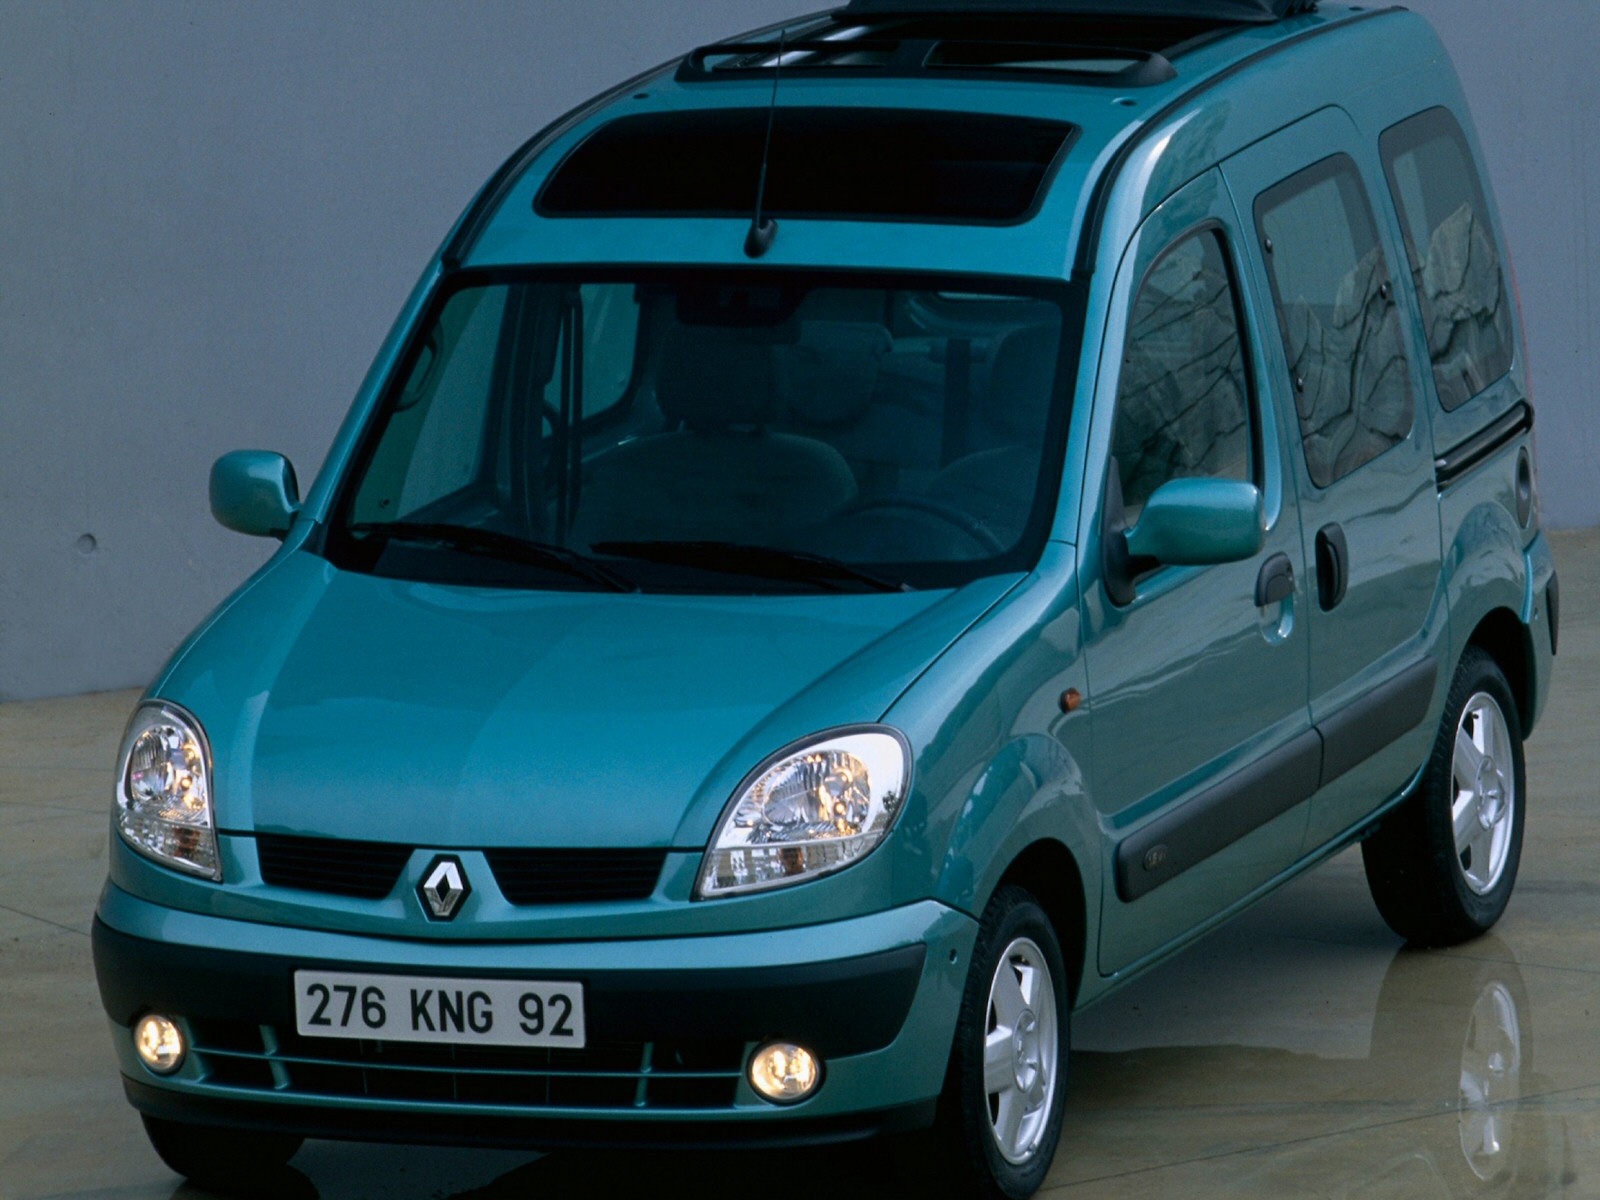 Car in pictures car photo gallery » Renault Kangoo 2004